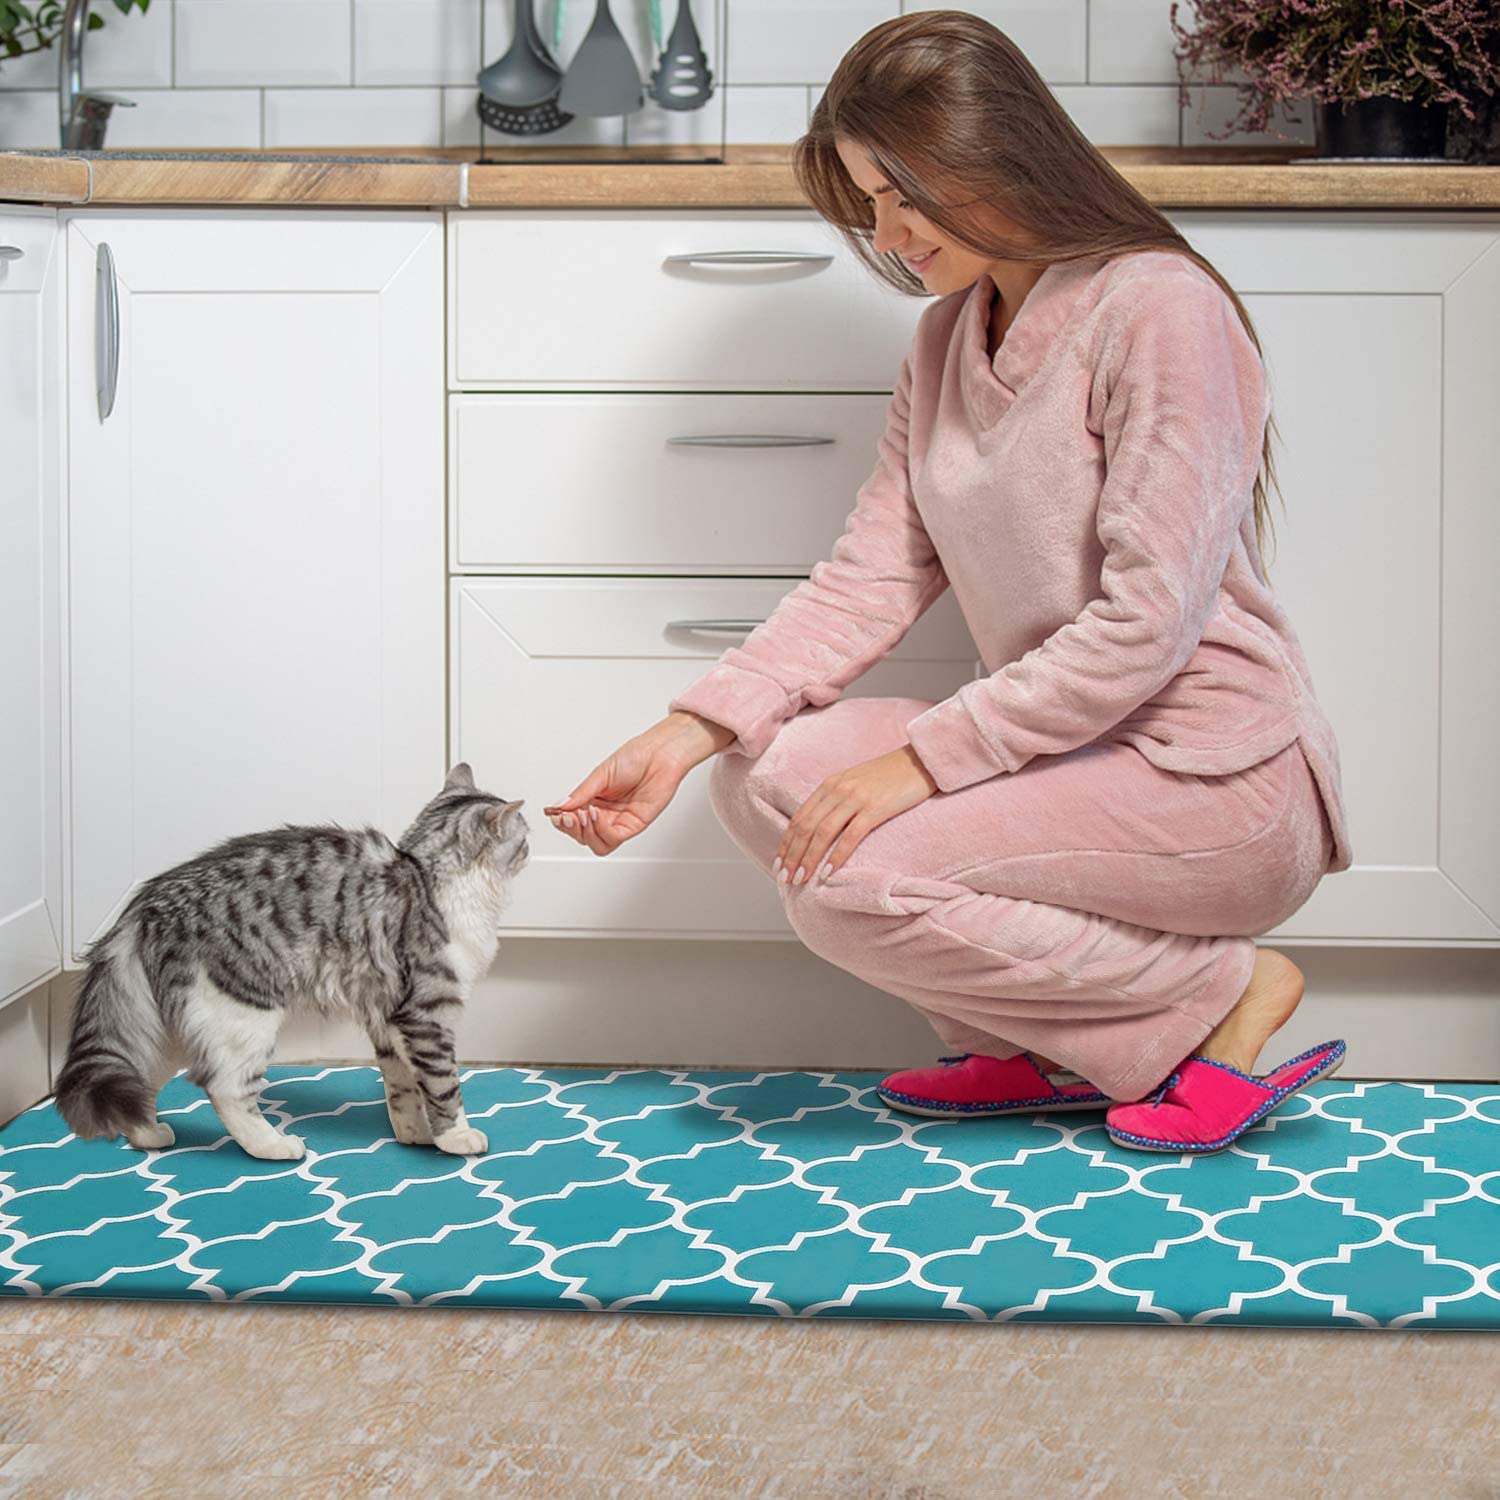 Tritard Anti Fatigue Kitchen Mats for Floor Memory Foam Cushioned Boho Non  Slip Kitchen Rugs Set of 2 Waterproof Comfort Padded Standing Mat for